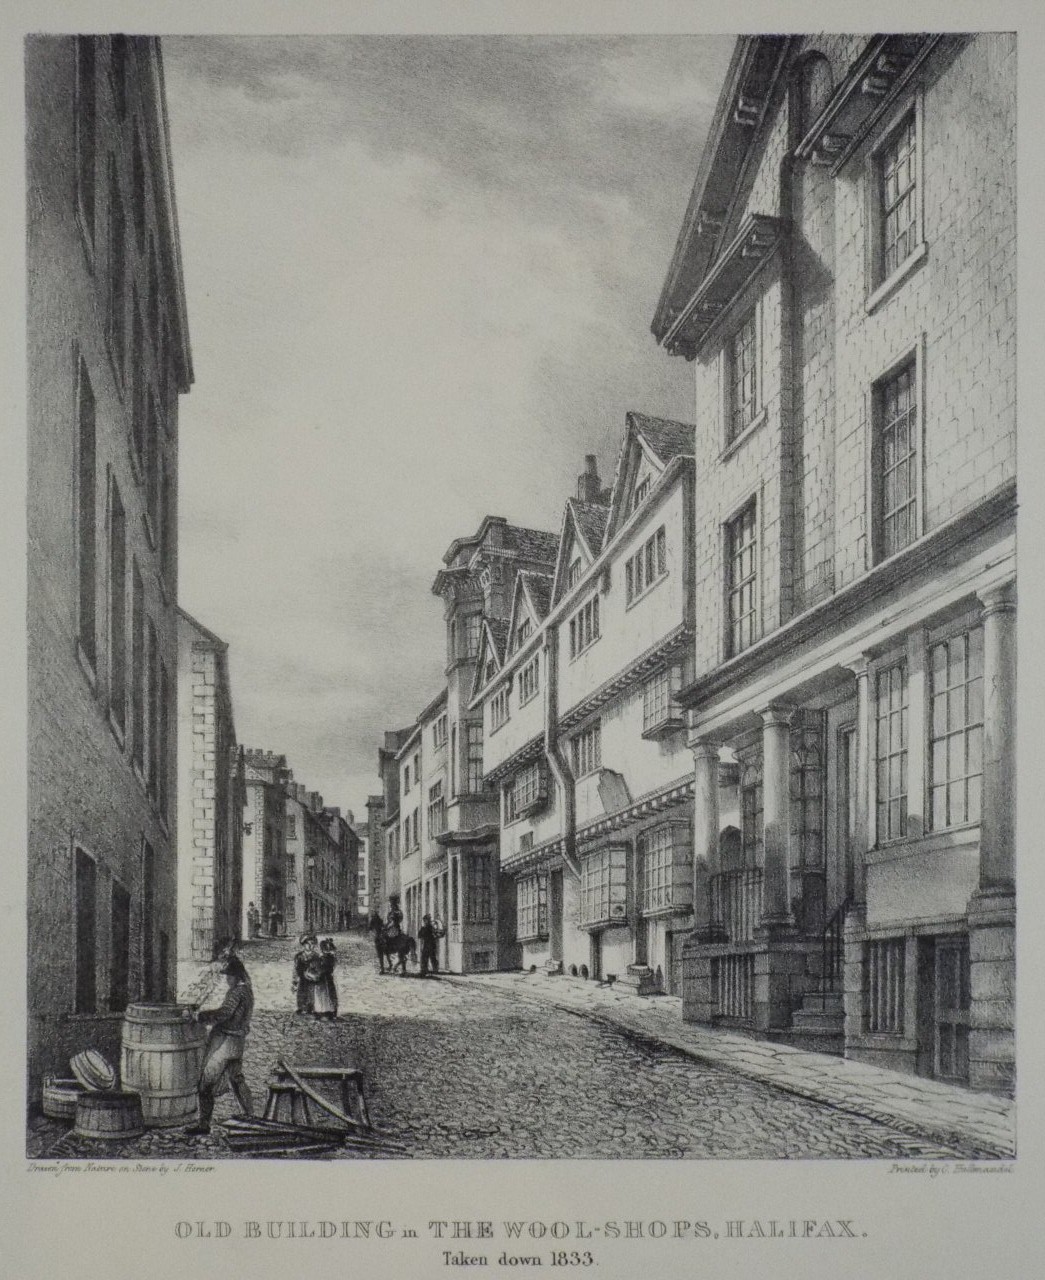 Lithograph - Old Buildings in The Wool-Shops, Halifax. Taken down 1832. - Horner